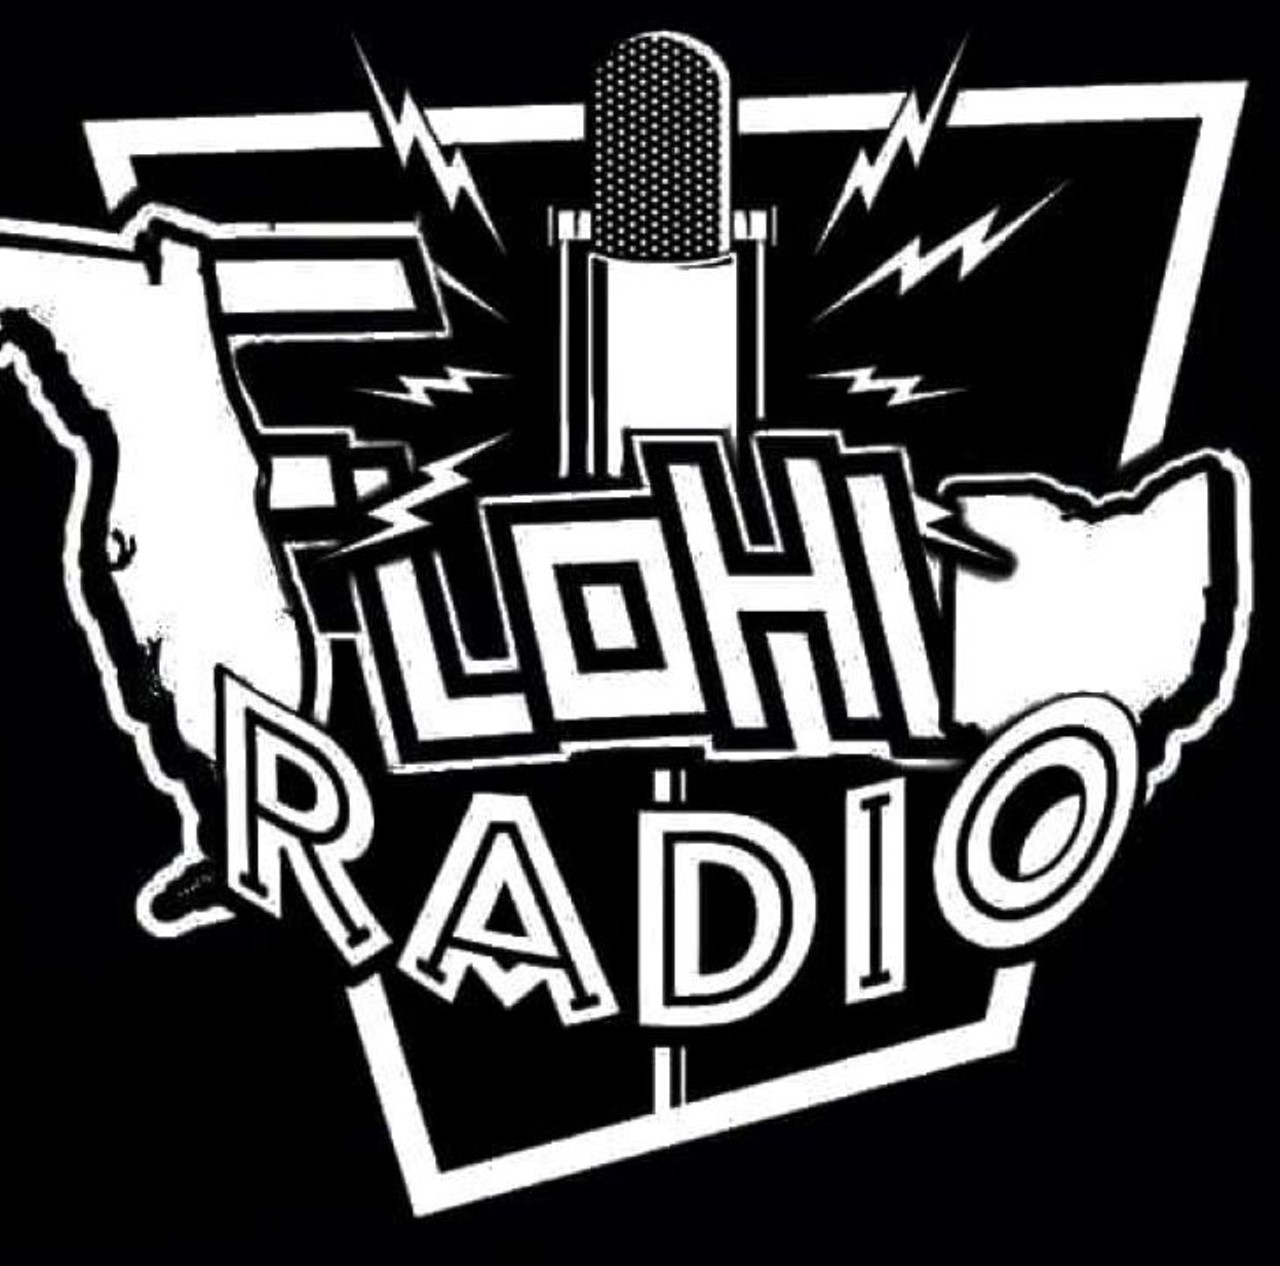 Flohio Radio
If listeners want a one-stop shop where they can tap into multiple aspects of the underground hip-hop, poetry and art scenes, then they should visit Flohio Radio, which is home to close to a dozen shows including Waves of  the Bay, Jus Chillin, Tuth Radio, Diamond Vibes and more. Flohio Radio on Facebook 
Photo via Flohio Radio/Facebook